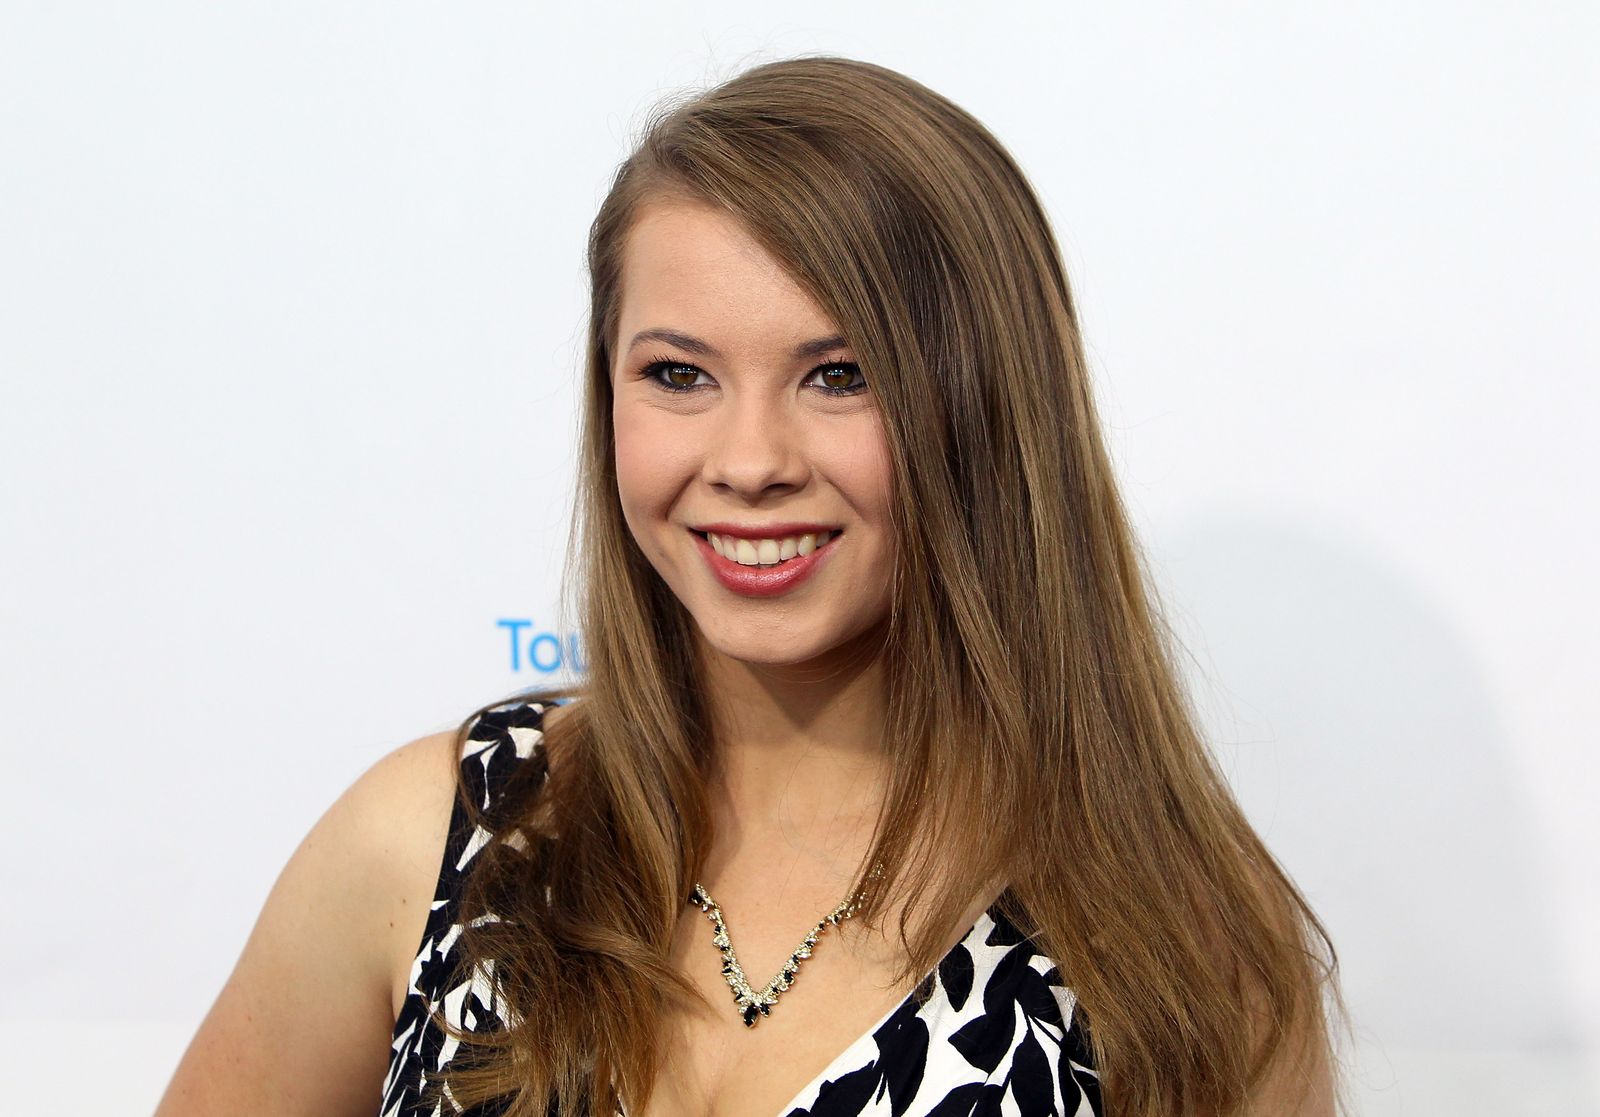  Bindi Irwin at the Steve Irwin Gala Dinner in Los Angeles on May 21, 2016 | Getty Images 